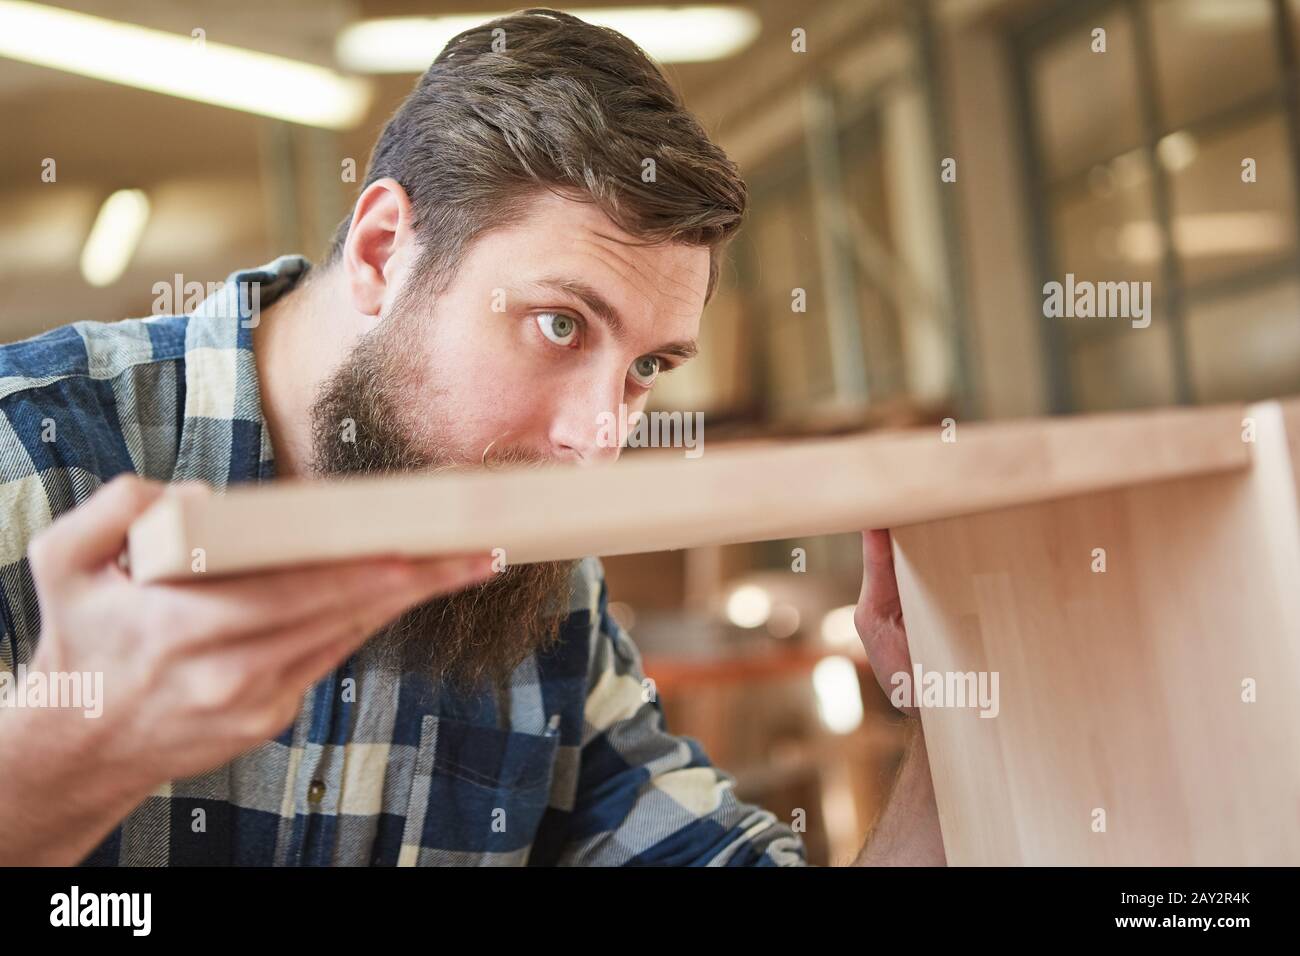 Carpenter apprentice mortises a wooden shelf in a joinery or joinery Stock Photo